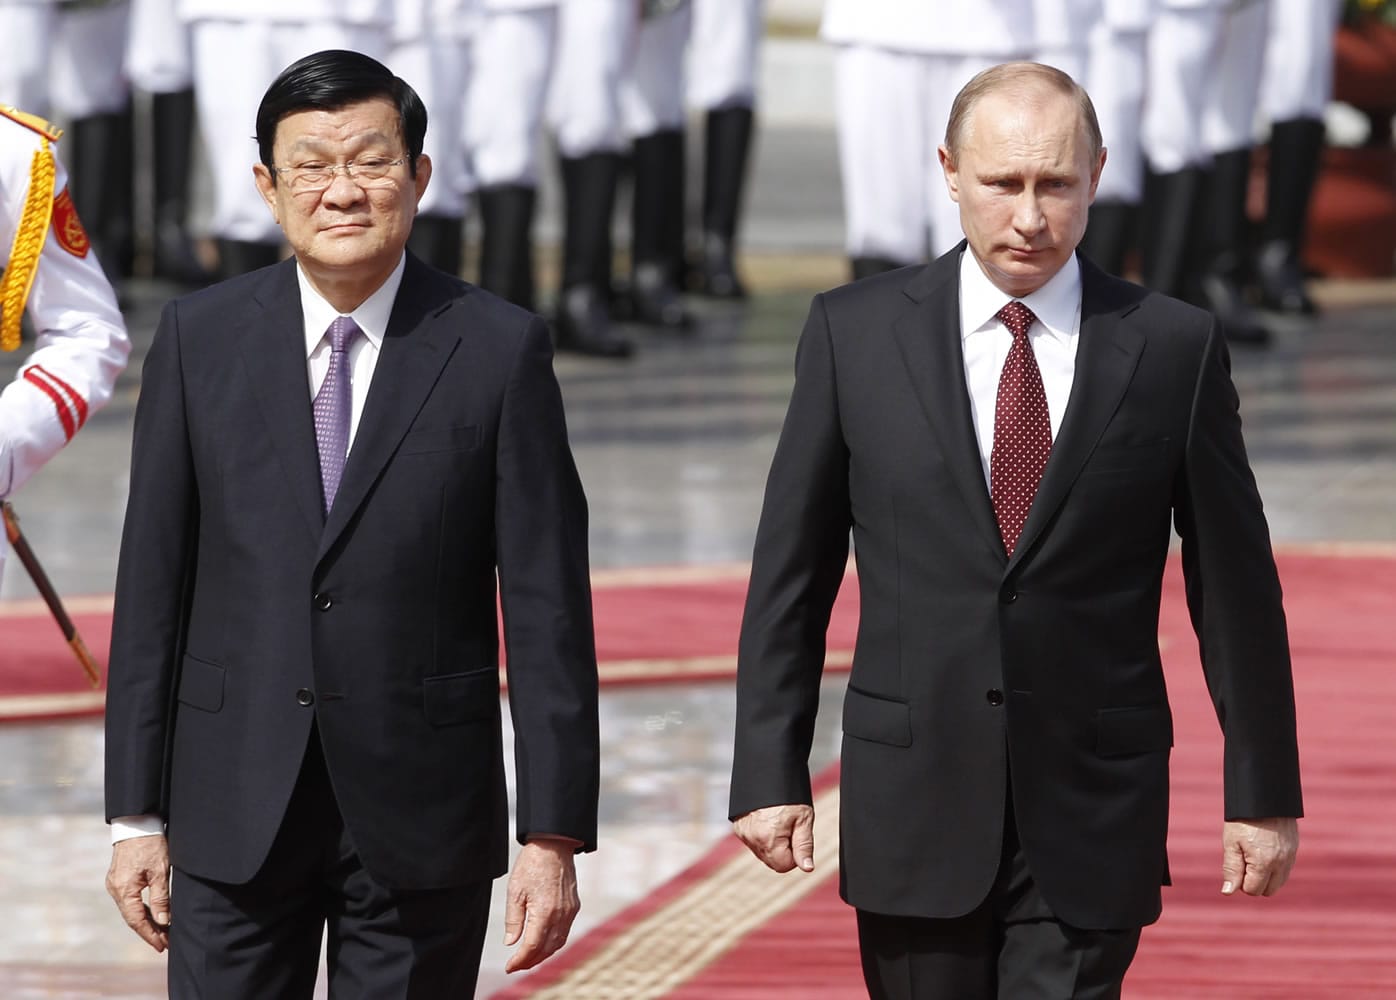 Russian President Vladimir Putin, right, and his Vietnamese counterpart, Truong Tan Sang, walk together as they review the guard of honor during a welcoming ceremony at the Presidential Palace in Hanoi on Tuesday.